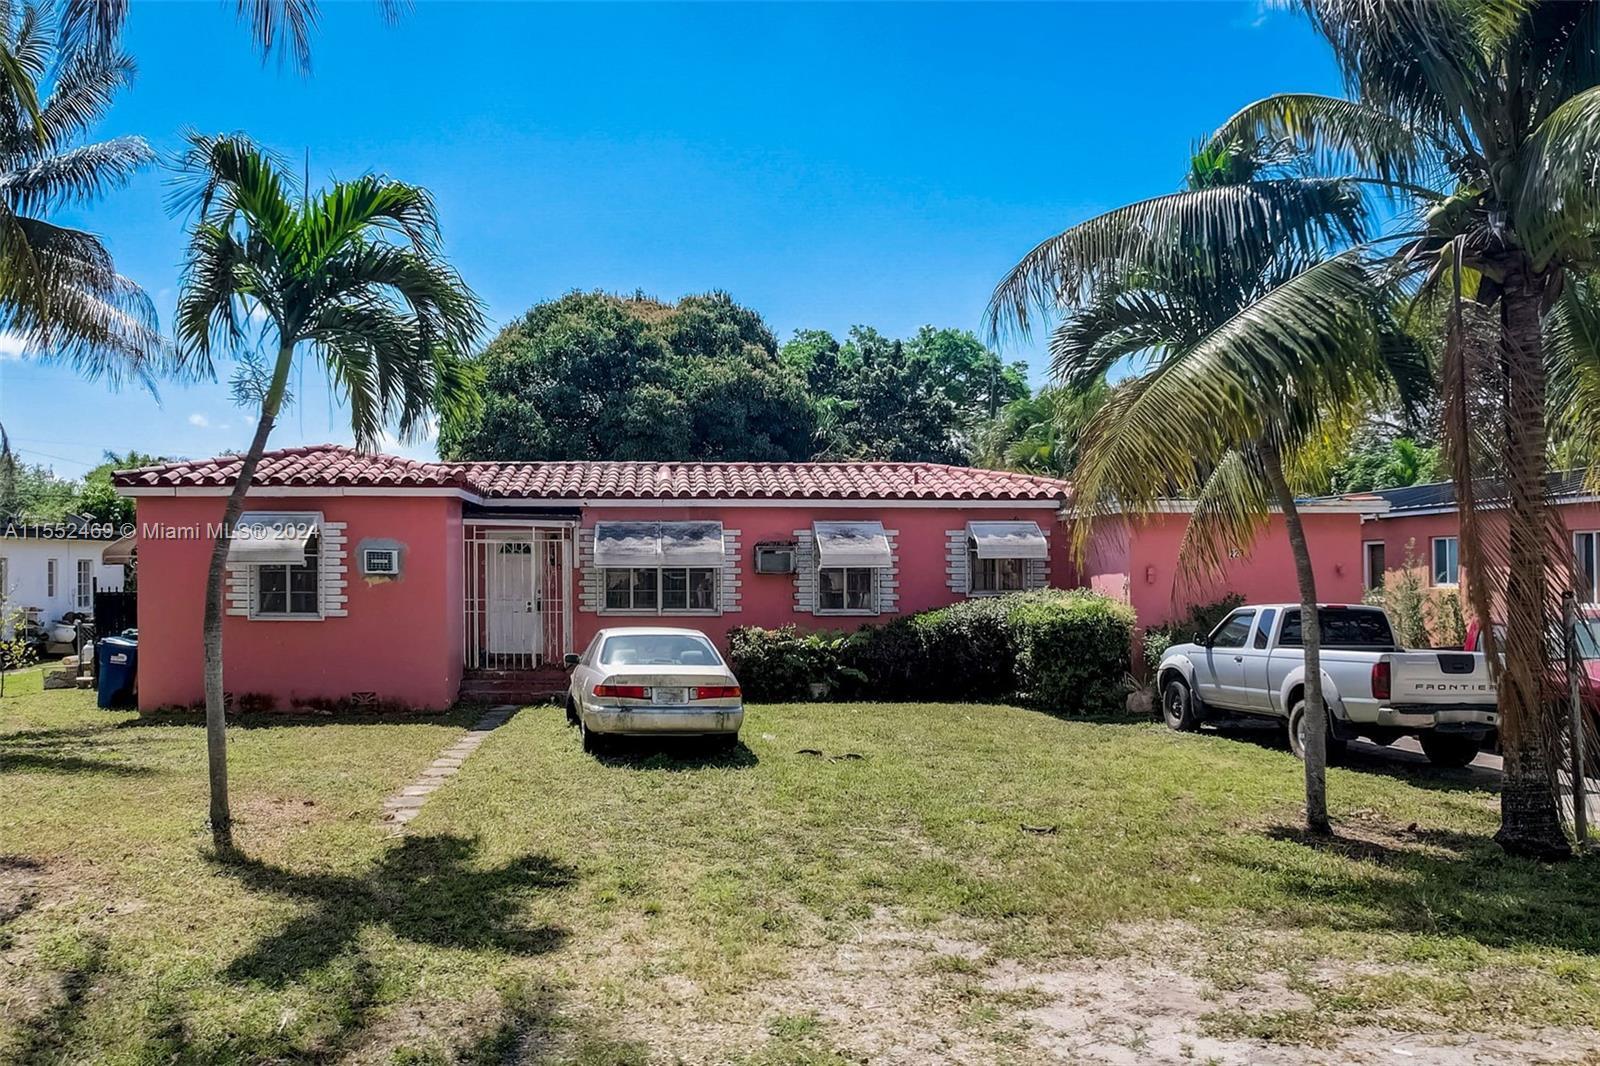 Photo of 220 NW 145th St in Miami, FL